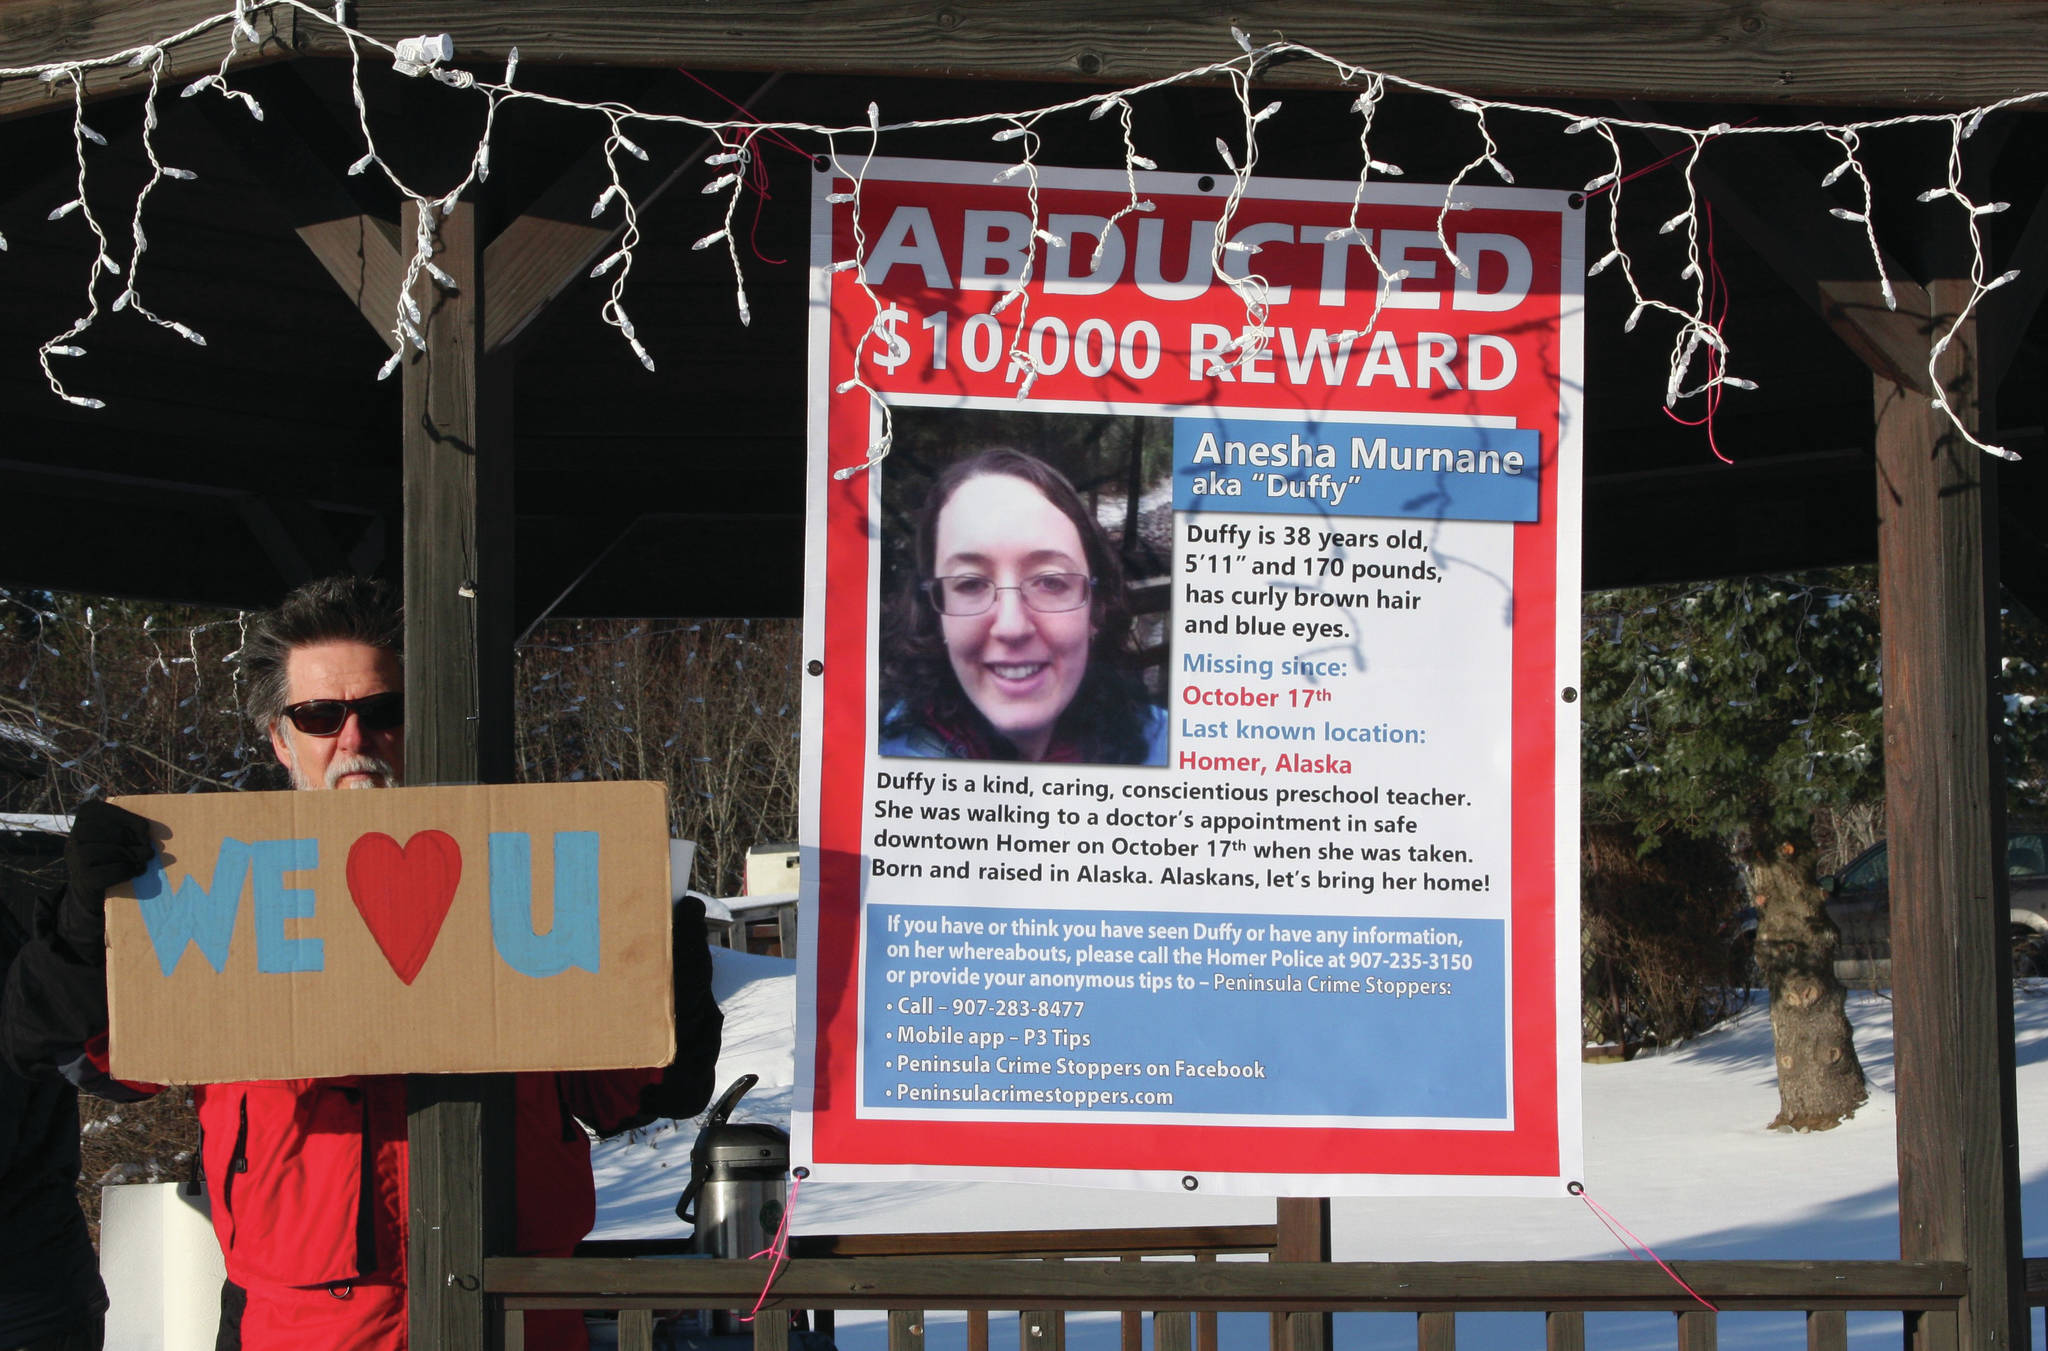 Wes Schacht, a friend and tenant of Sara and Ed Berg, stands next to a “missing” poster of Anesha “Duffy” Murnane in the gazebo at WKFL Park during a candlelight vigil in Homer, Alaska, on Saturday, Feb. 1, 2020. (Photo by Delcenia Cosman)